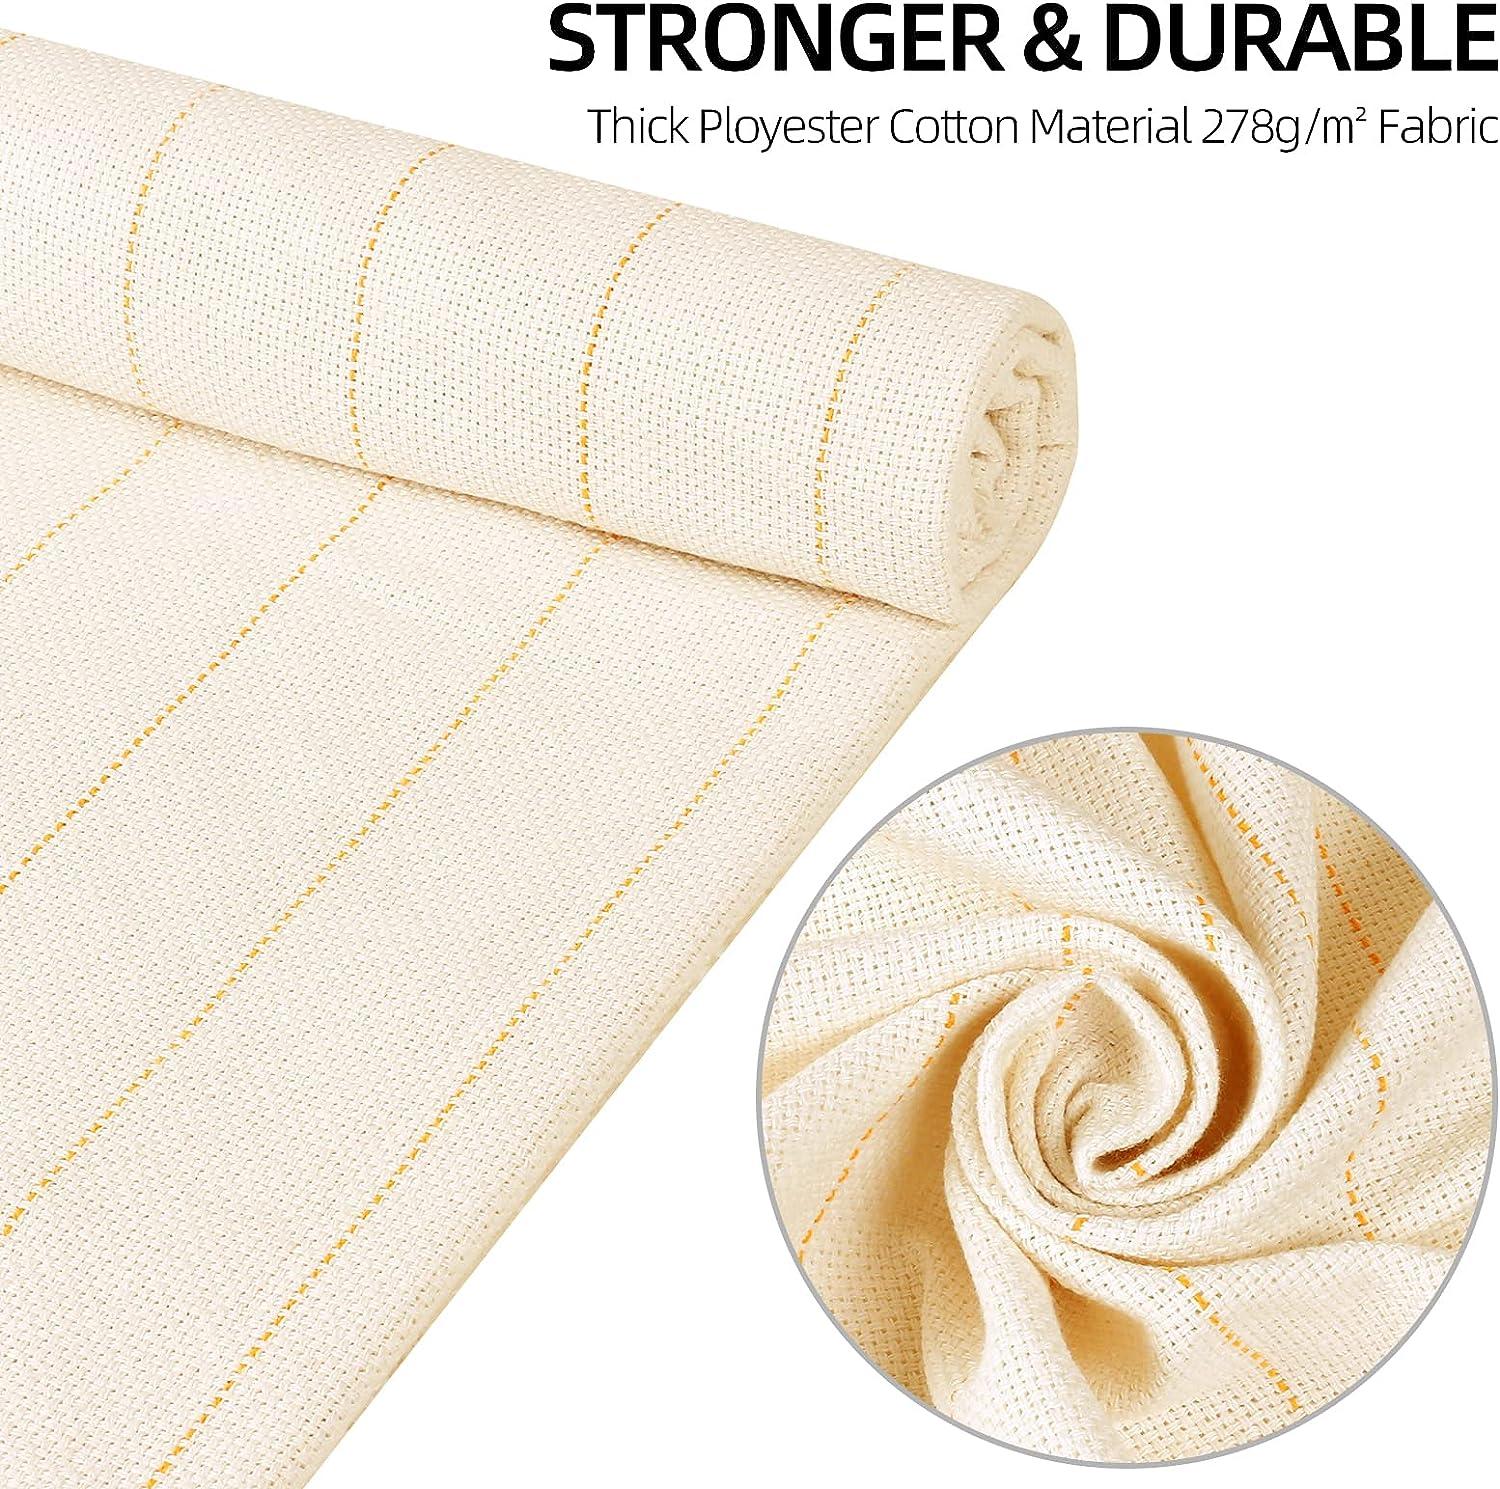 Primary White Rug Fabric Monk Cloth with lines